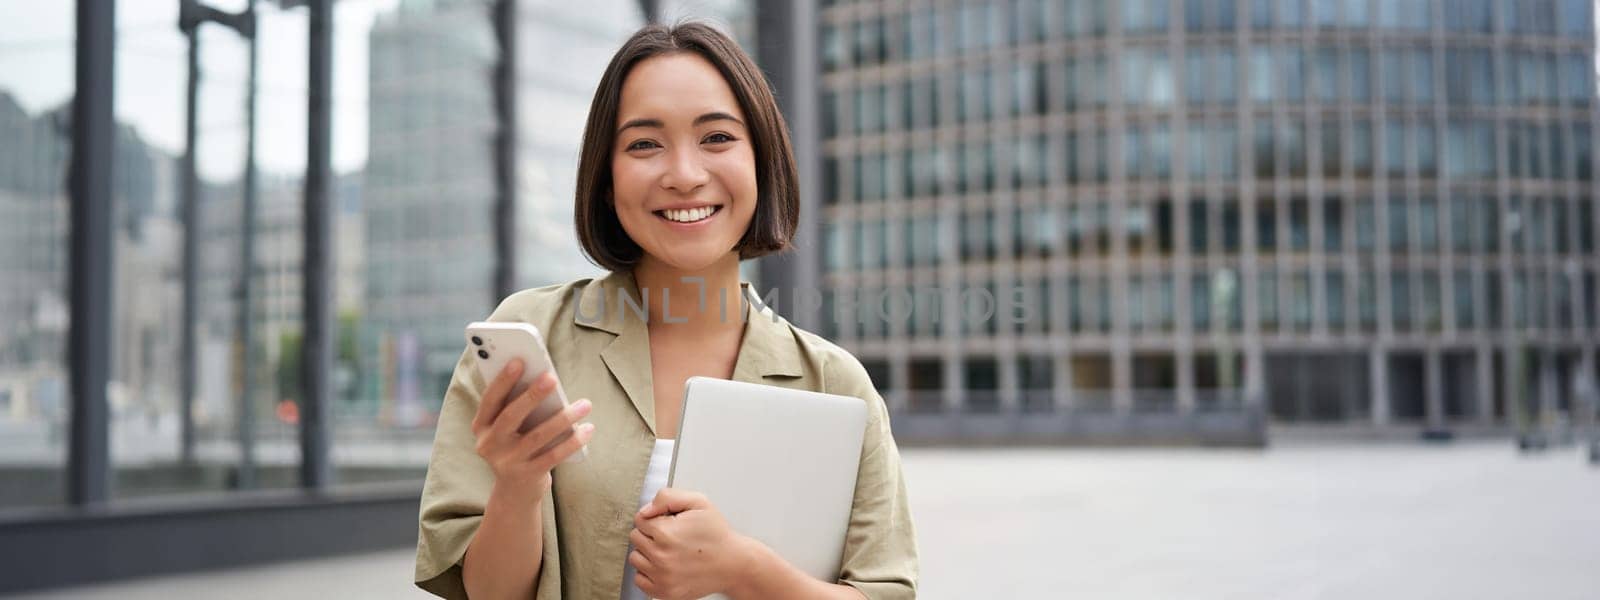 Portrait of smiling asian girl with laptop, holds mobile phone and looks happy at camera, stands on street.